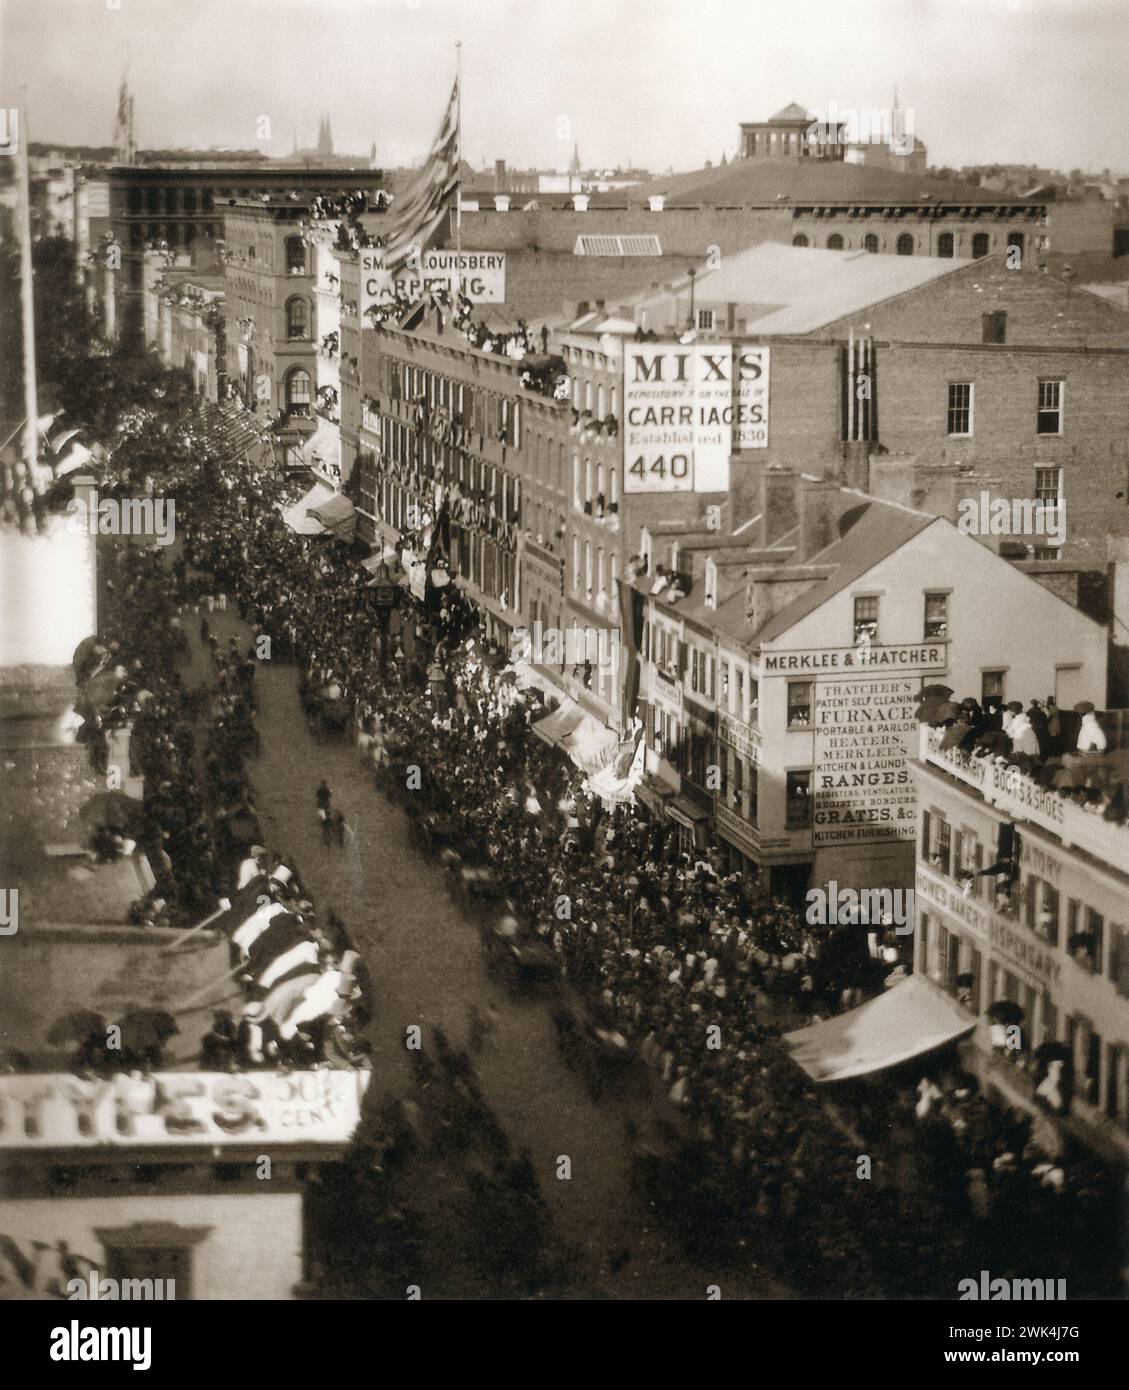 Parade on Broadway, New York City, to celebrate the completion of the transatlantic telegraph cable. September 1, 1858. Vintage B&W Photograph by William  England Stock Photo